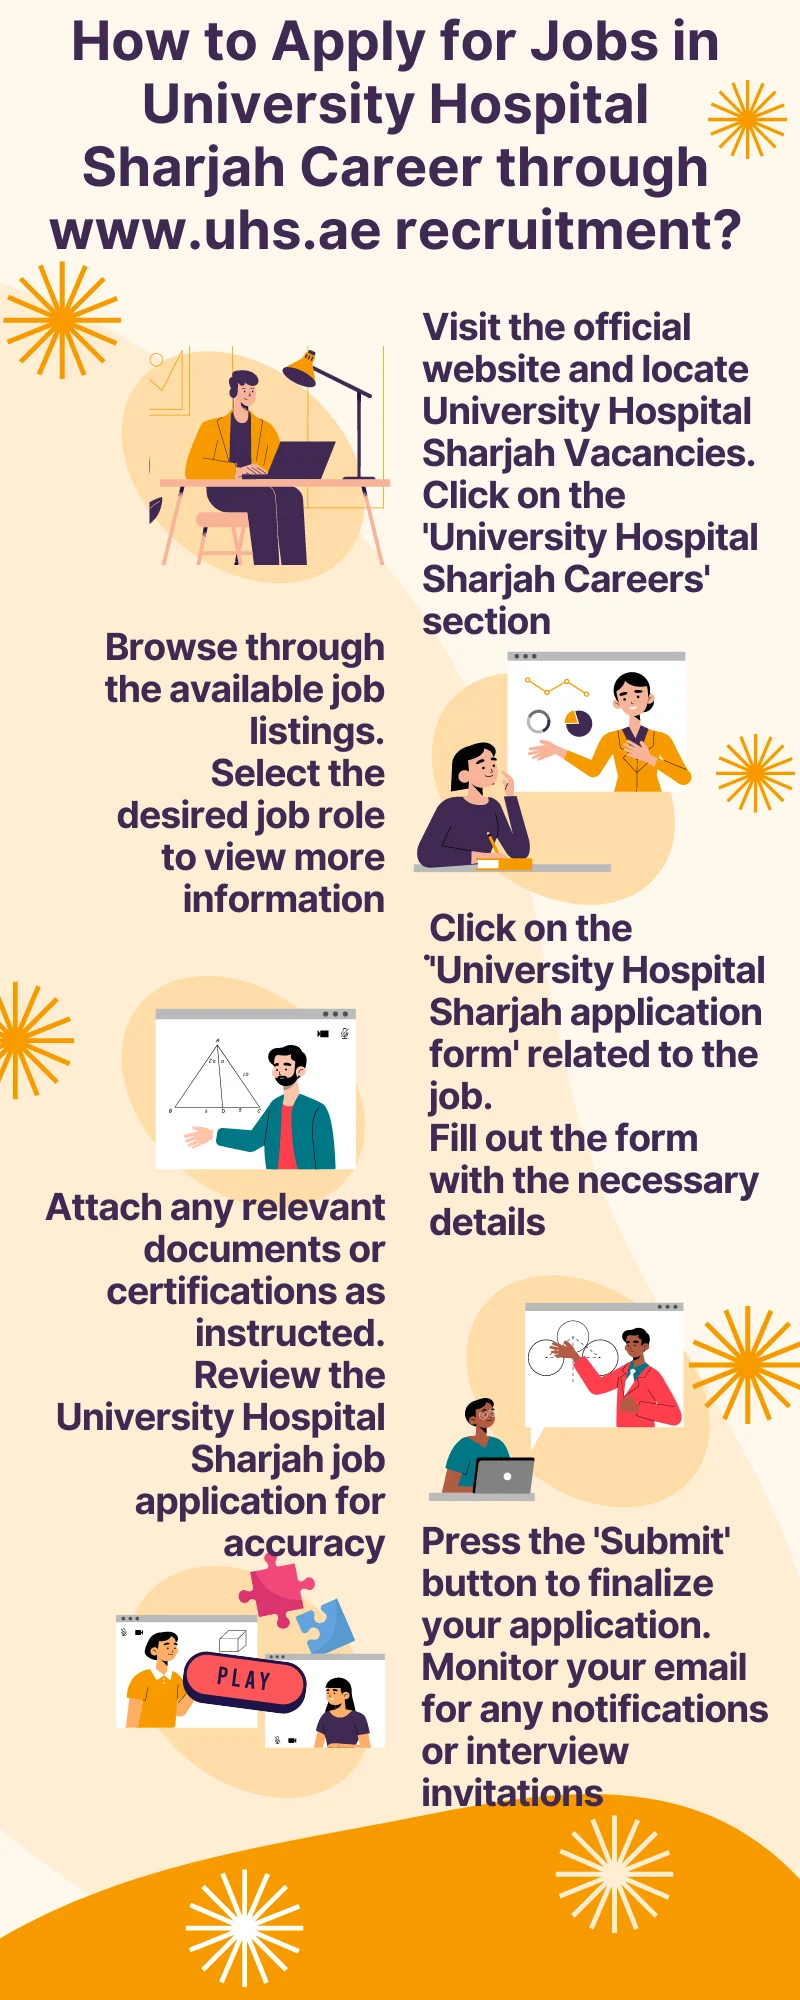 How to Apply for Jobs in University Hospital Sharjah Career through www.uhs.ae recruitment?